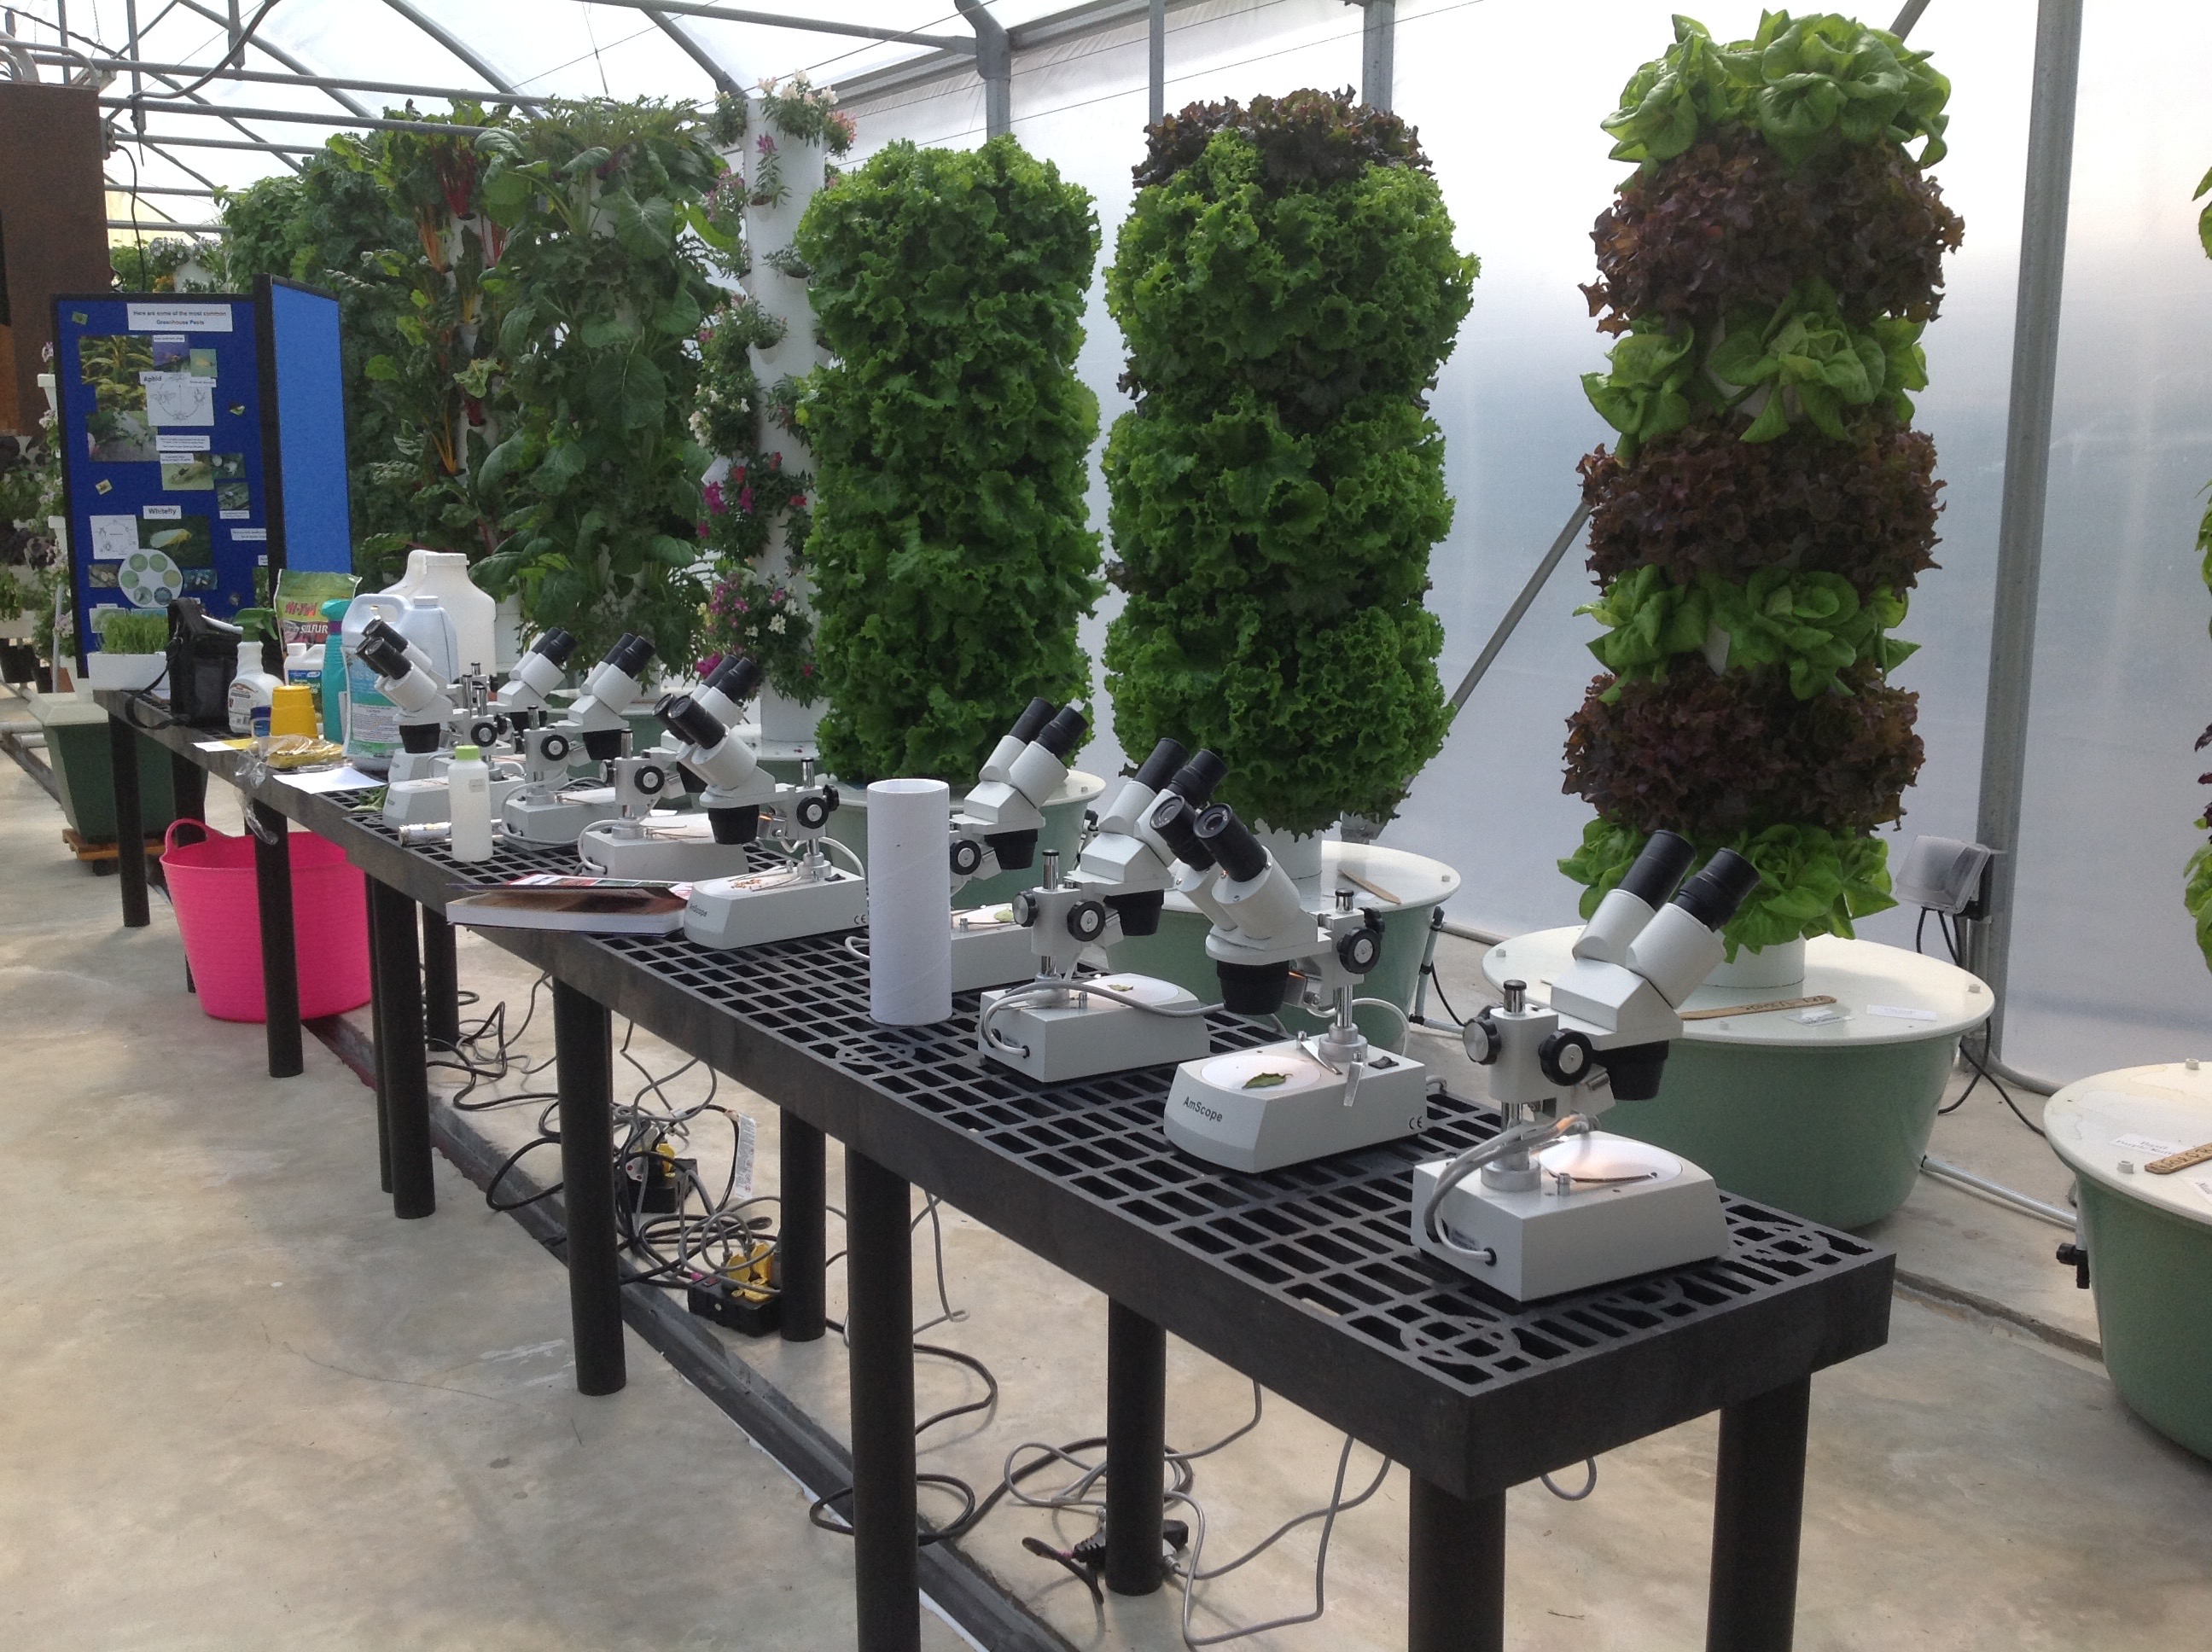 Lettuce growing in towers, bench with microscopes